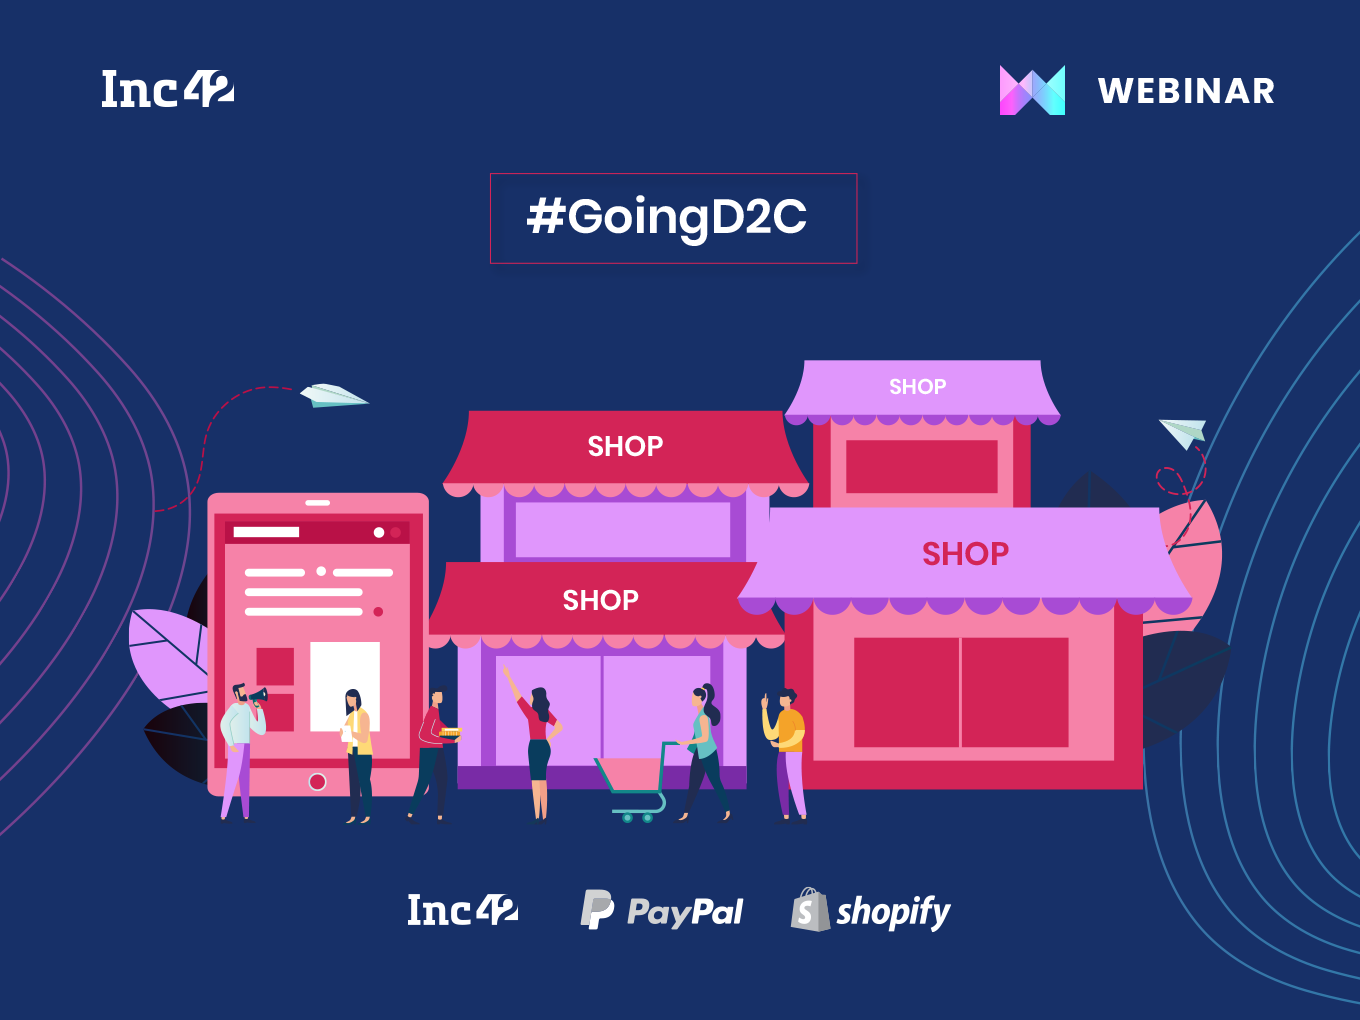 Inc42 Partners With PayPal And Shopify To Usher In India’s D2C Wave